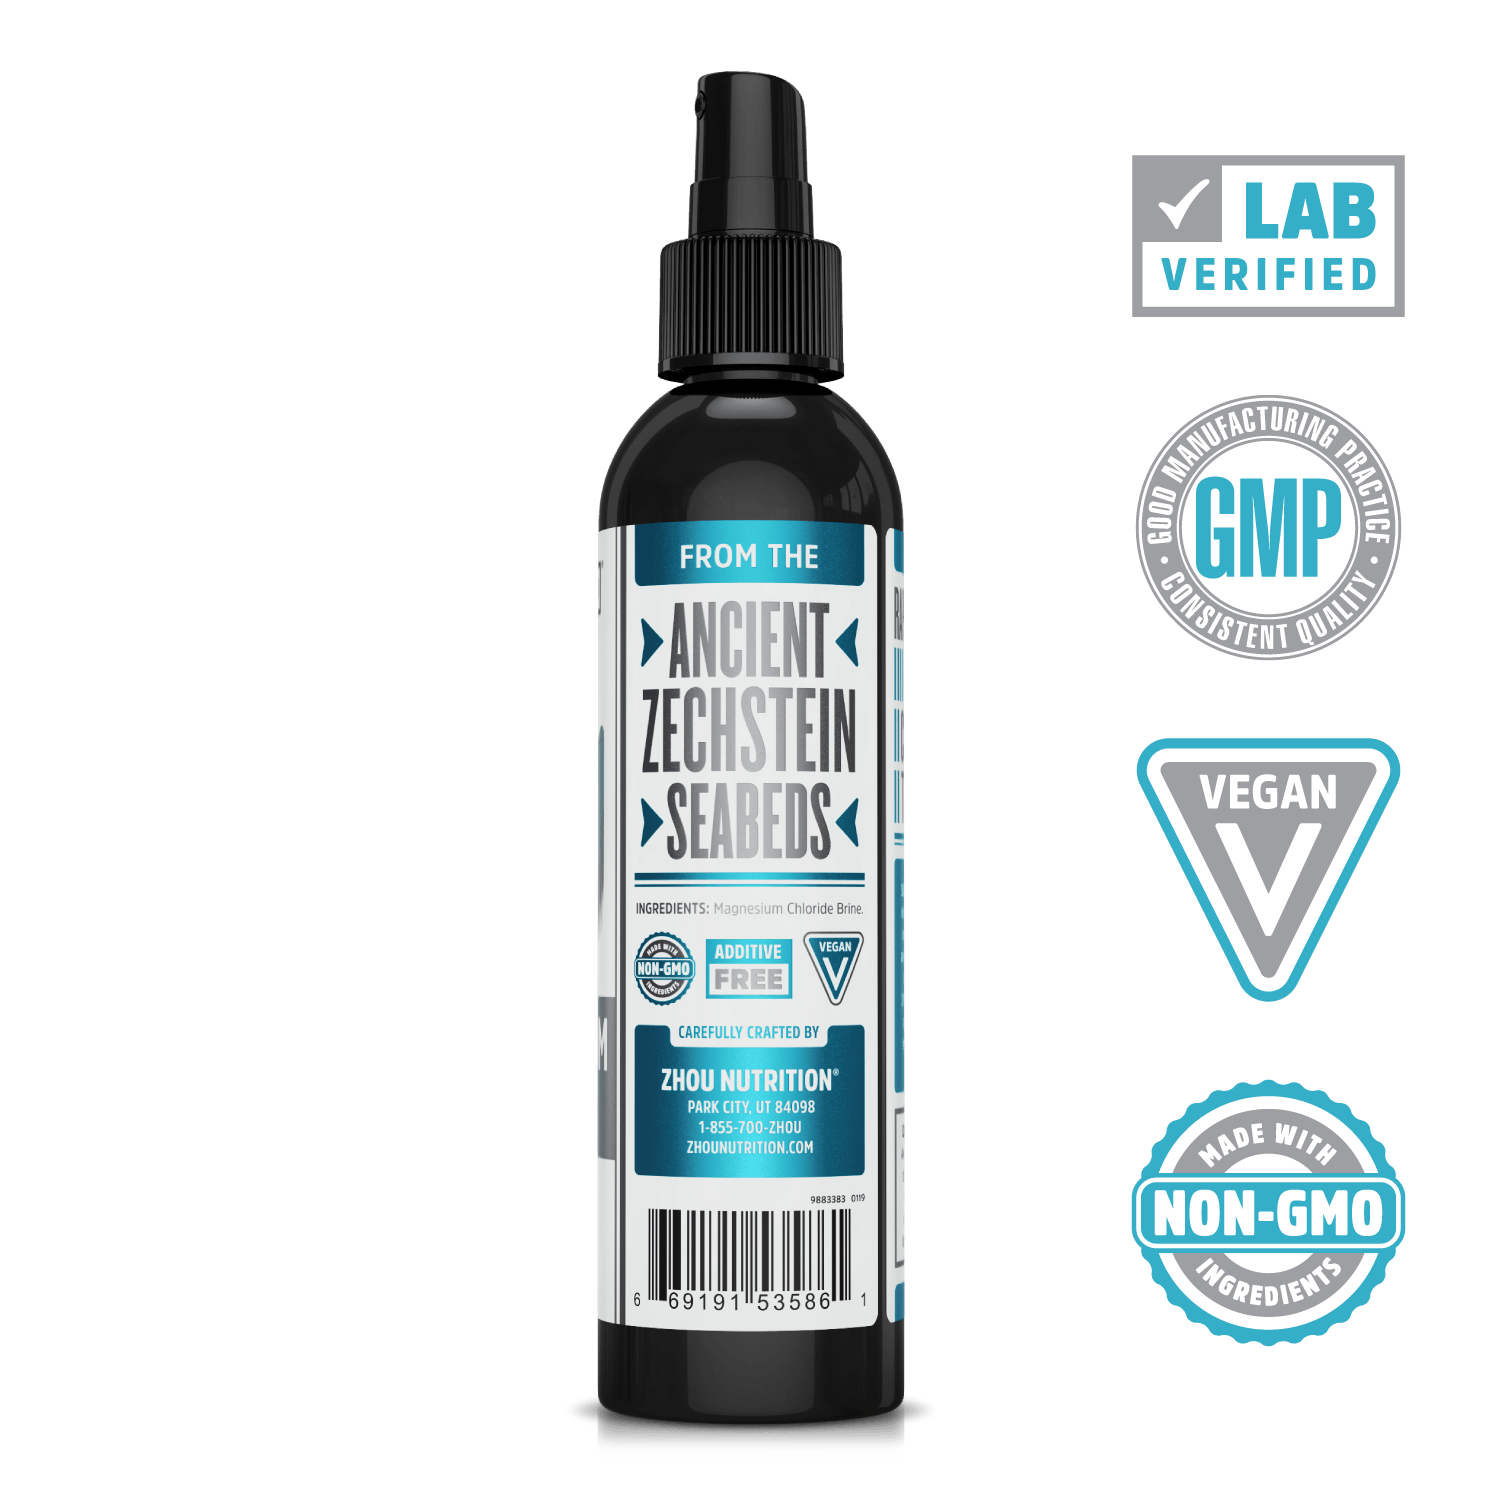 Zhou Nutrition Magnesium Oil Spray. Lab verified, good manufacturing practices, vegan, made with non-GMO ingredients